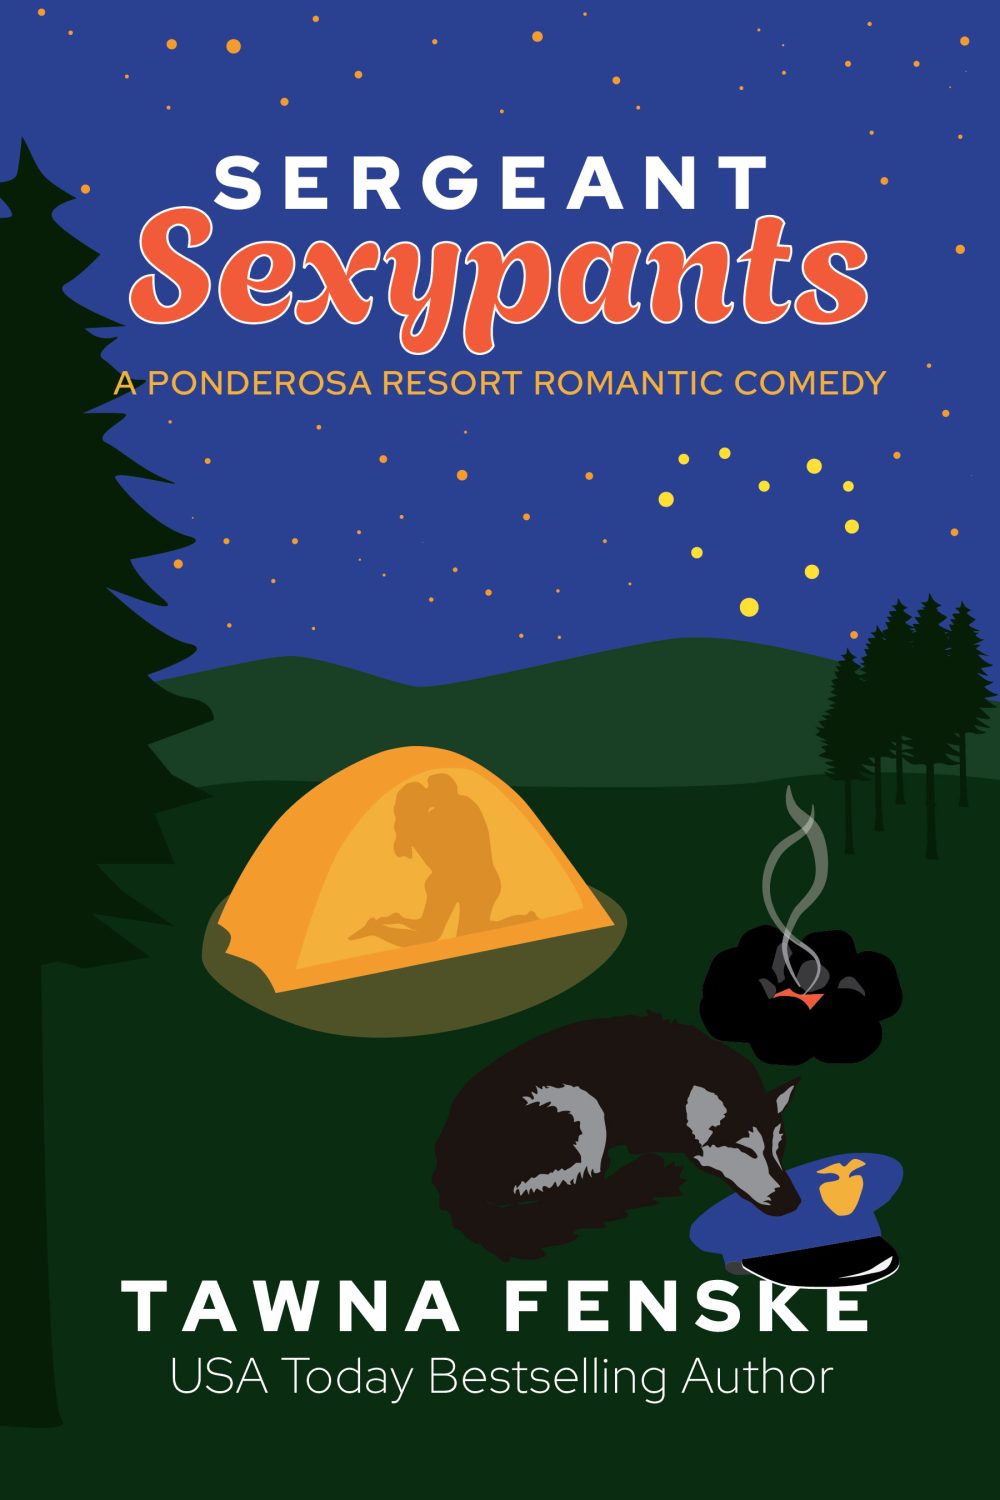 Seargeant Sexypants book cover